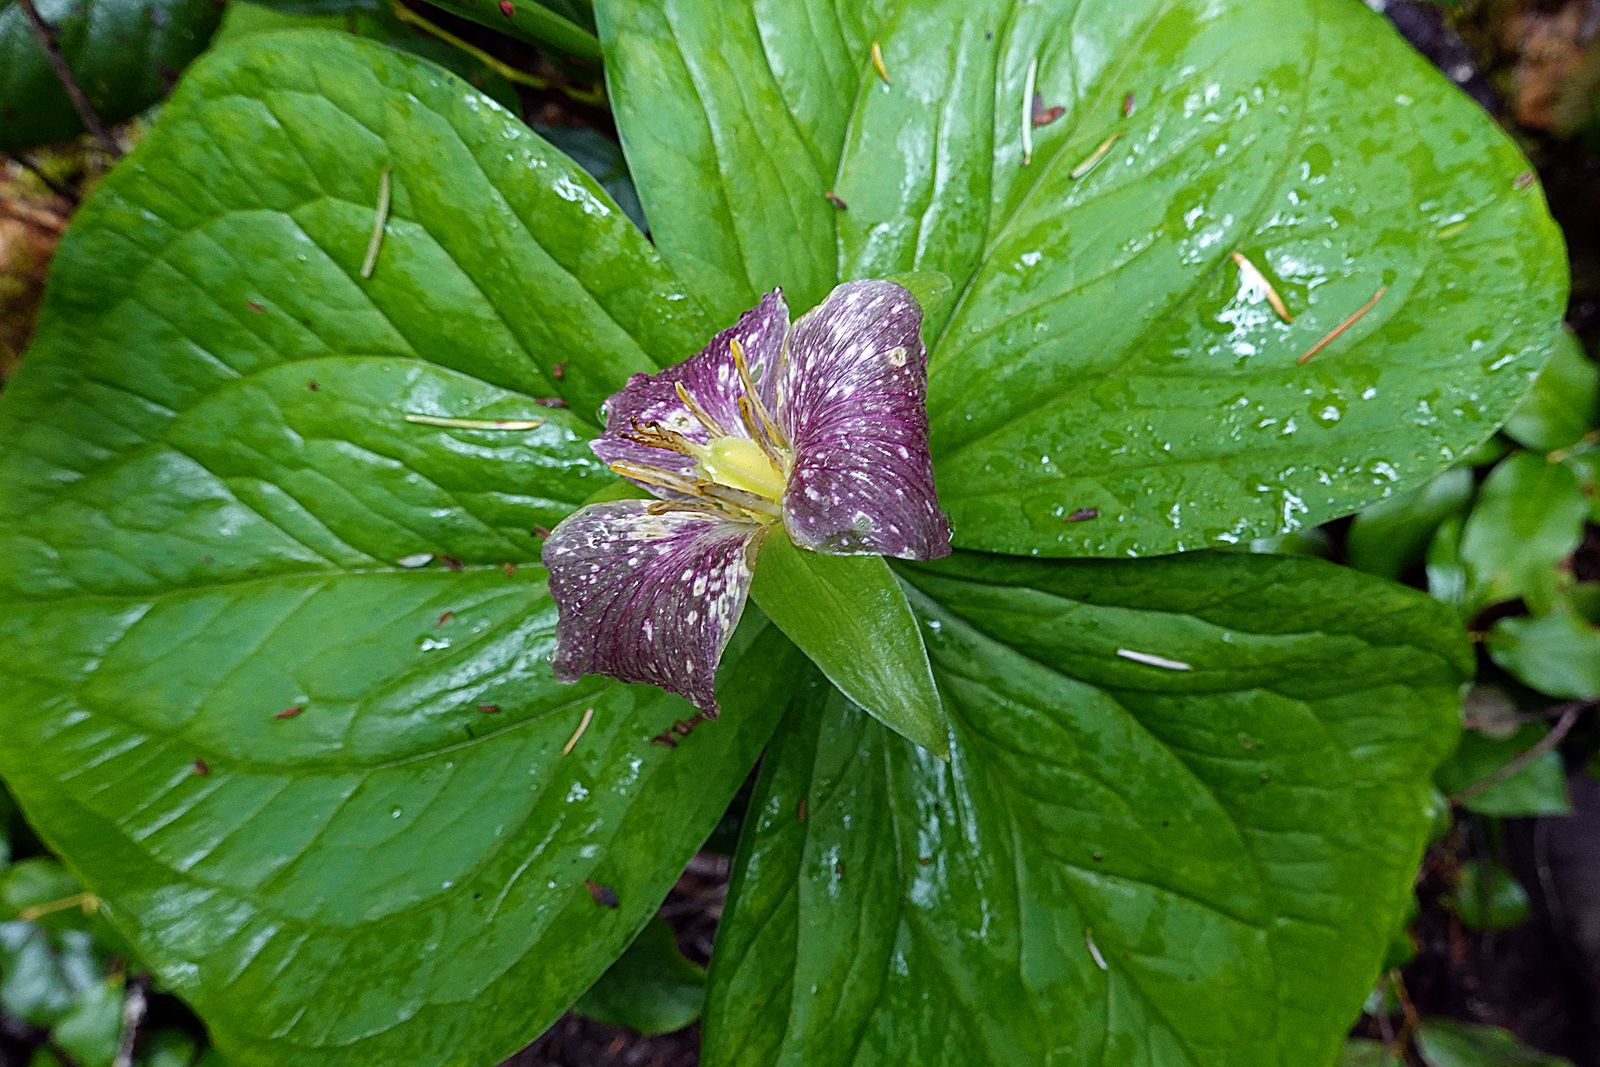  A very colorful Trillium flower 